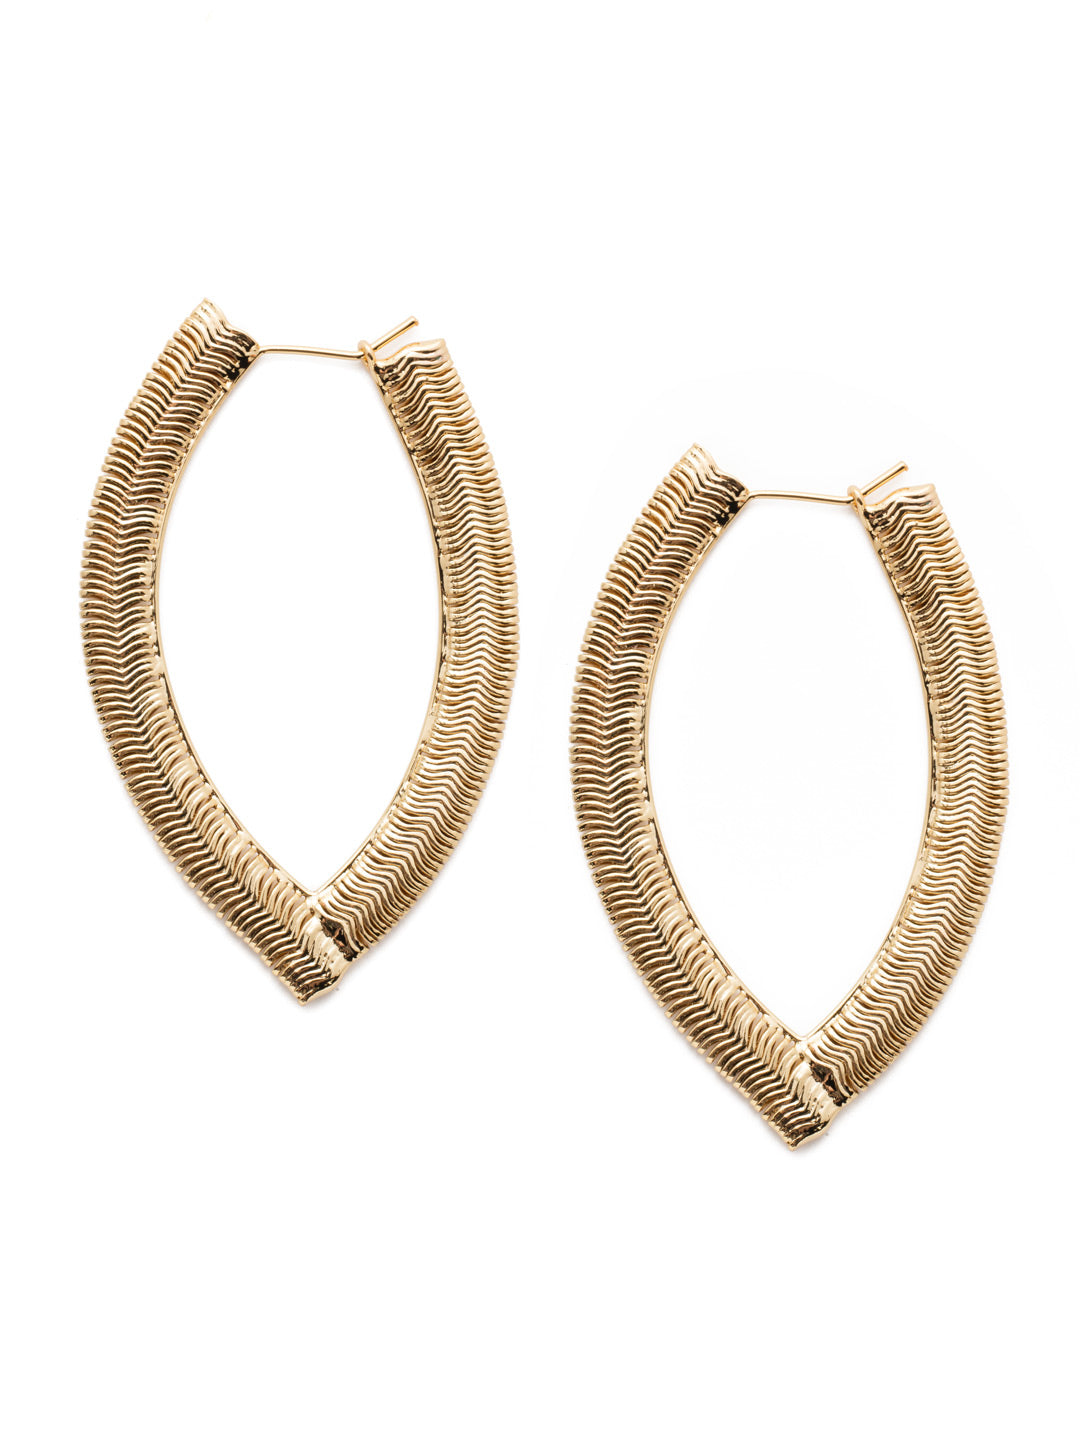 Whitney Hoop Earrings - 4EEP41BGCRY - <p>The Whitney Statement Hoop Earring shows off our new snake metal design in all its glory. Gift it to an edgy friend or keep it and show it off yourself. From Sorrelli's Crystal collection in our Bright Gold-tone finish.</p>